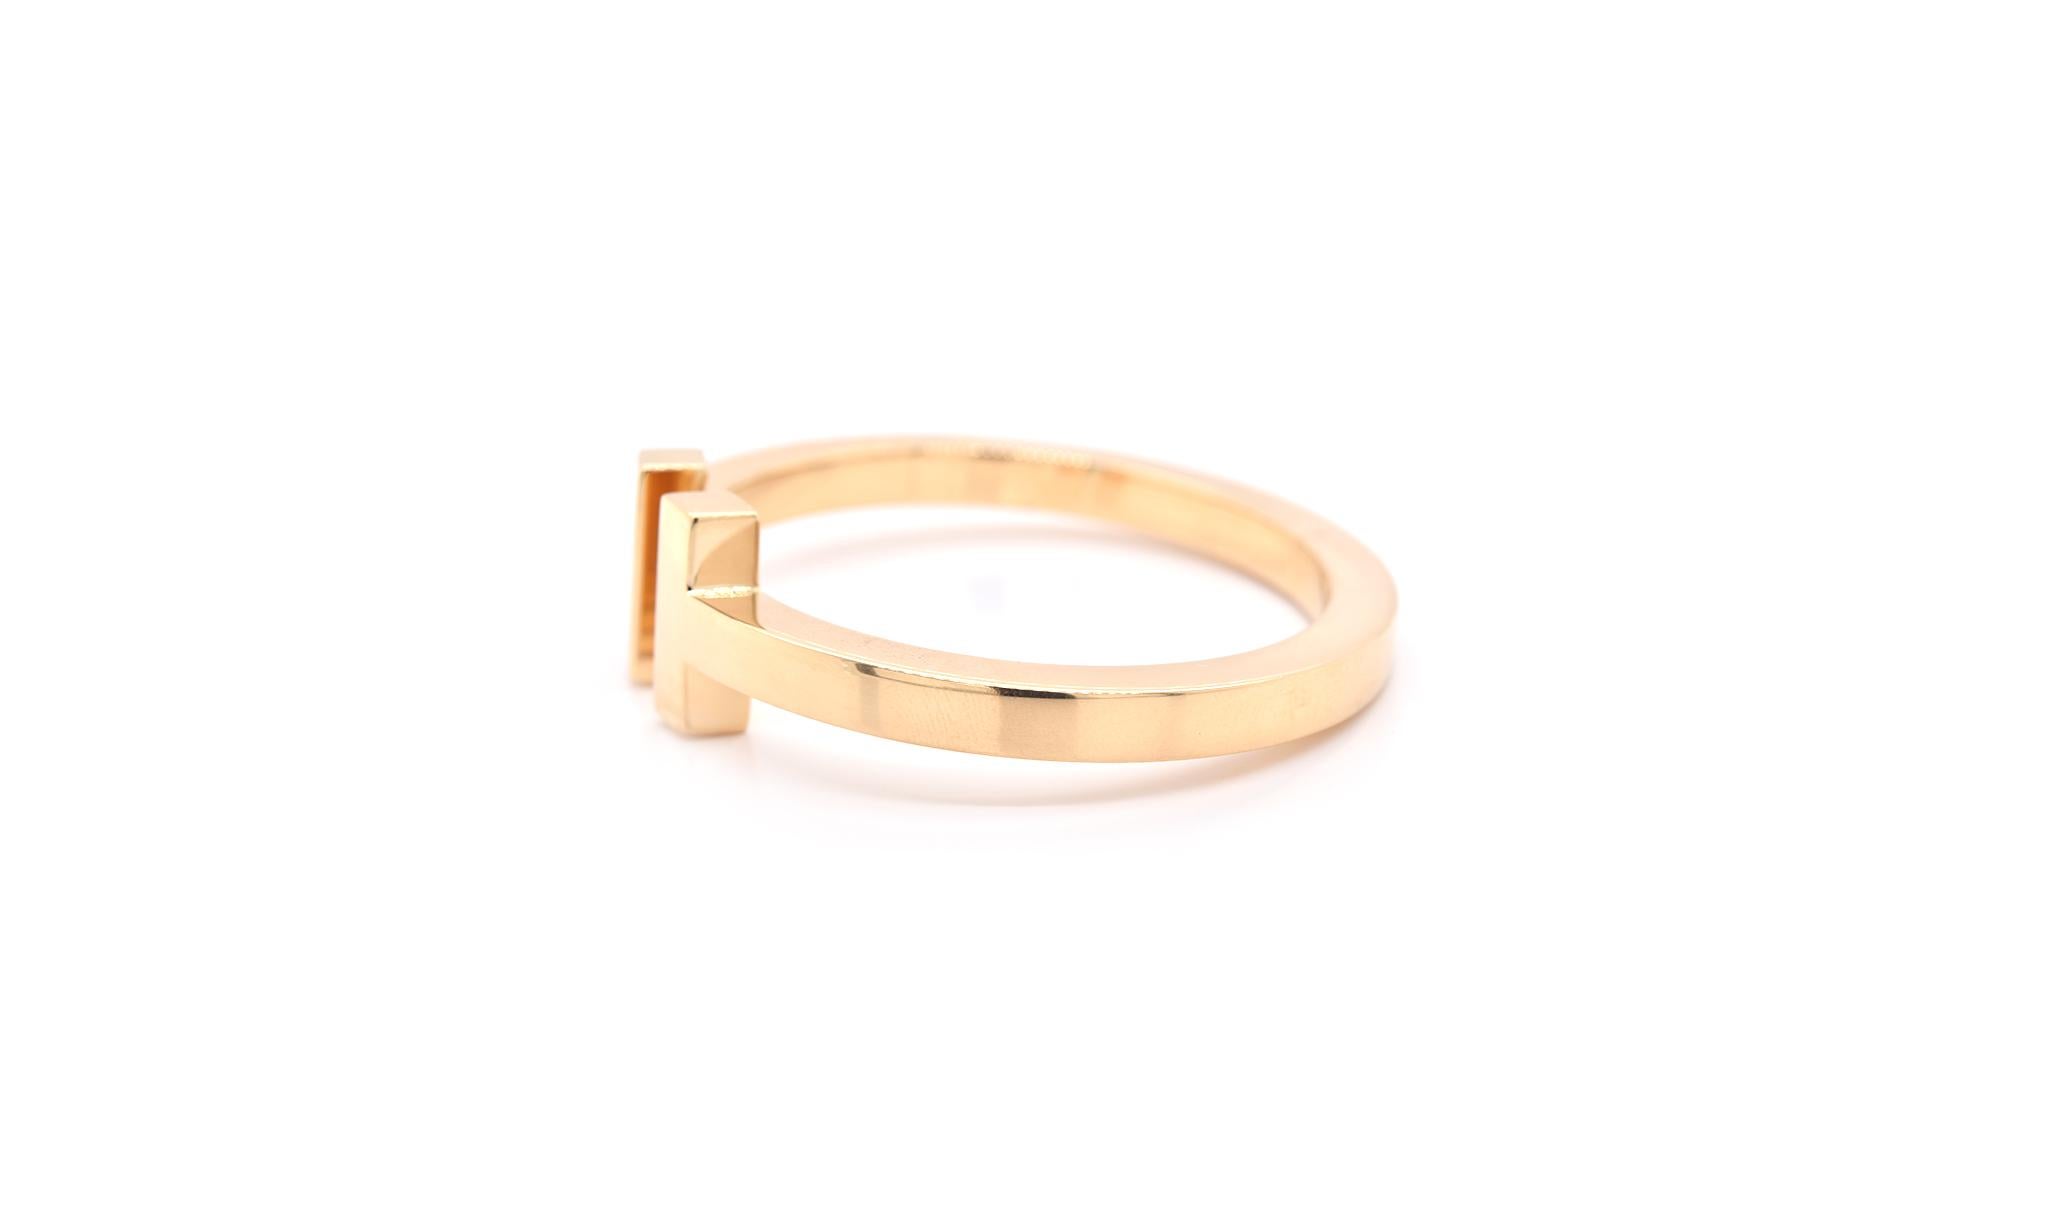 Designer: Tiffany & Co.
Material: 18k yellow gold
Dimensions: bracelet measures 4.80mm in width
Weight: 23.9 grams
Size: 5 ½ (Tiffany Extra Small)

Comes with original Tiffany & Co. Box.
